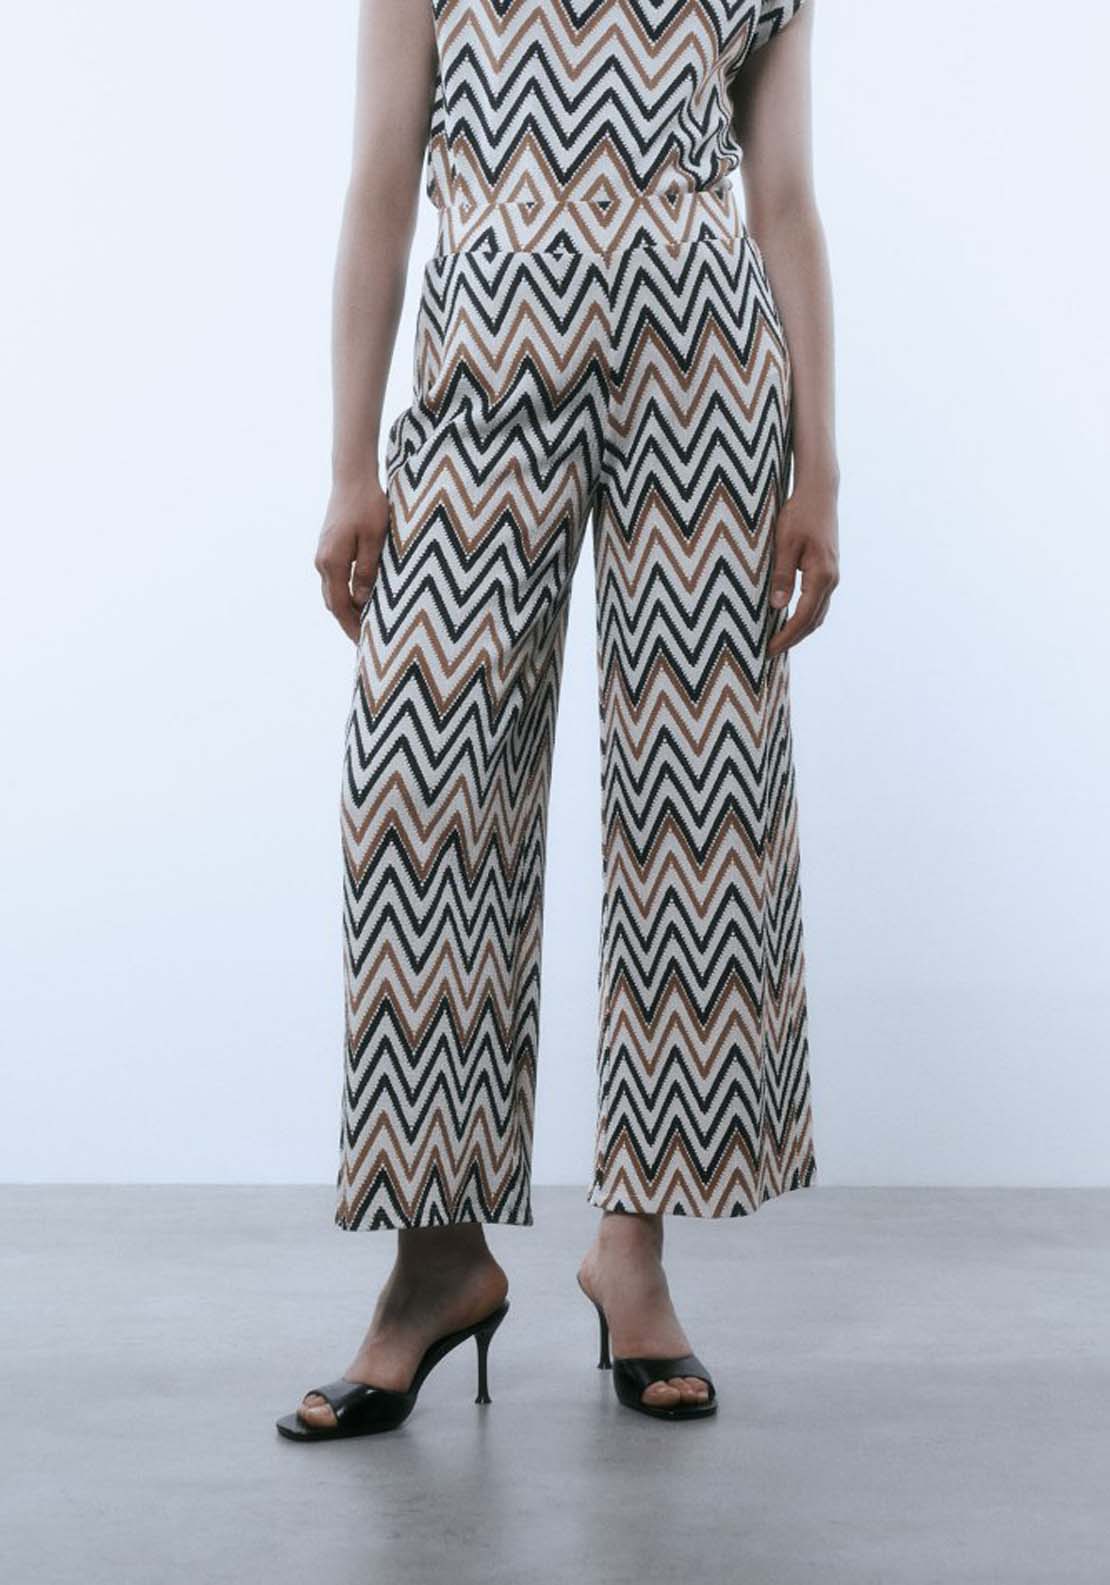 Sfera Zig-zag structured trousers - Yellow 1 Shaws Department Stores